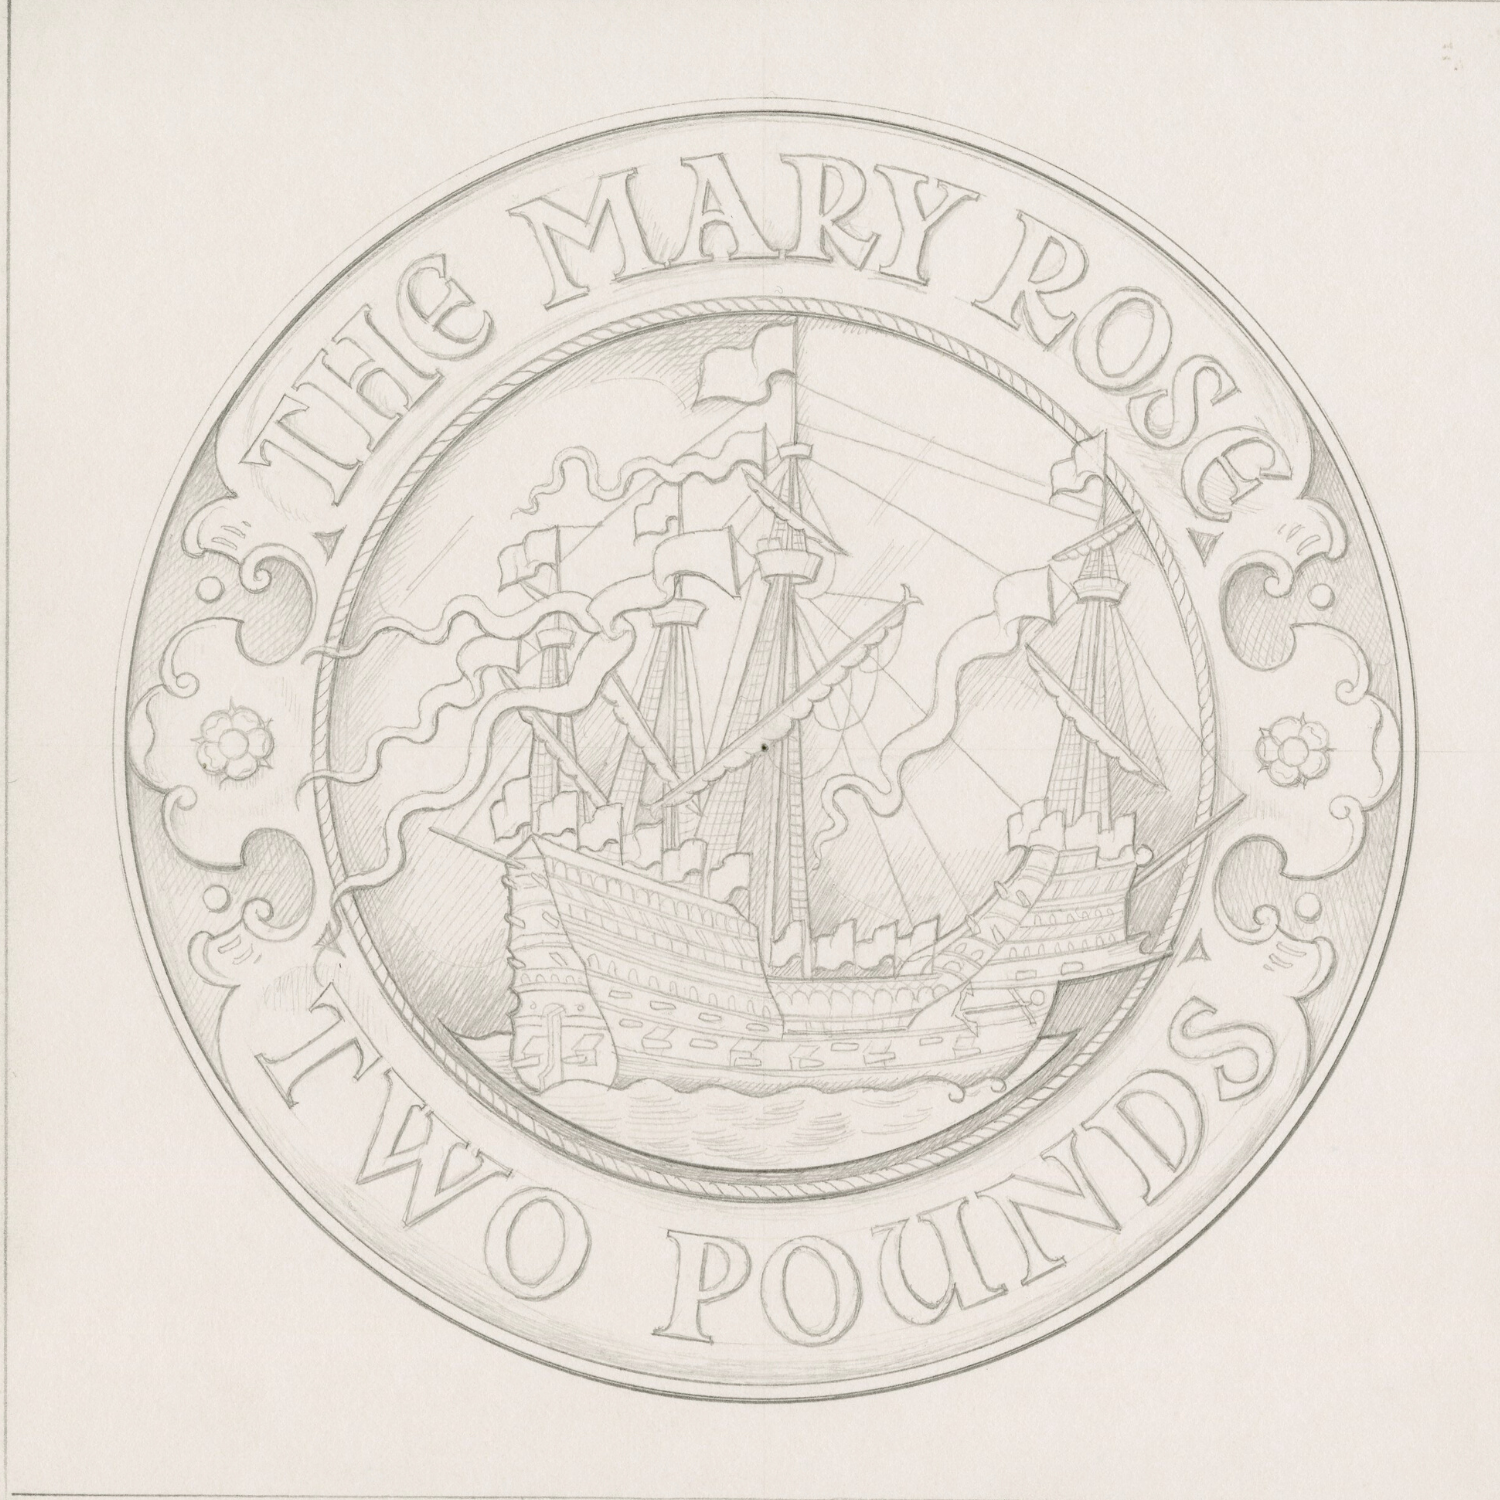 Artwork for the 2011 Mary Rose £2 coin